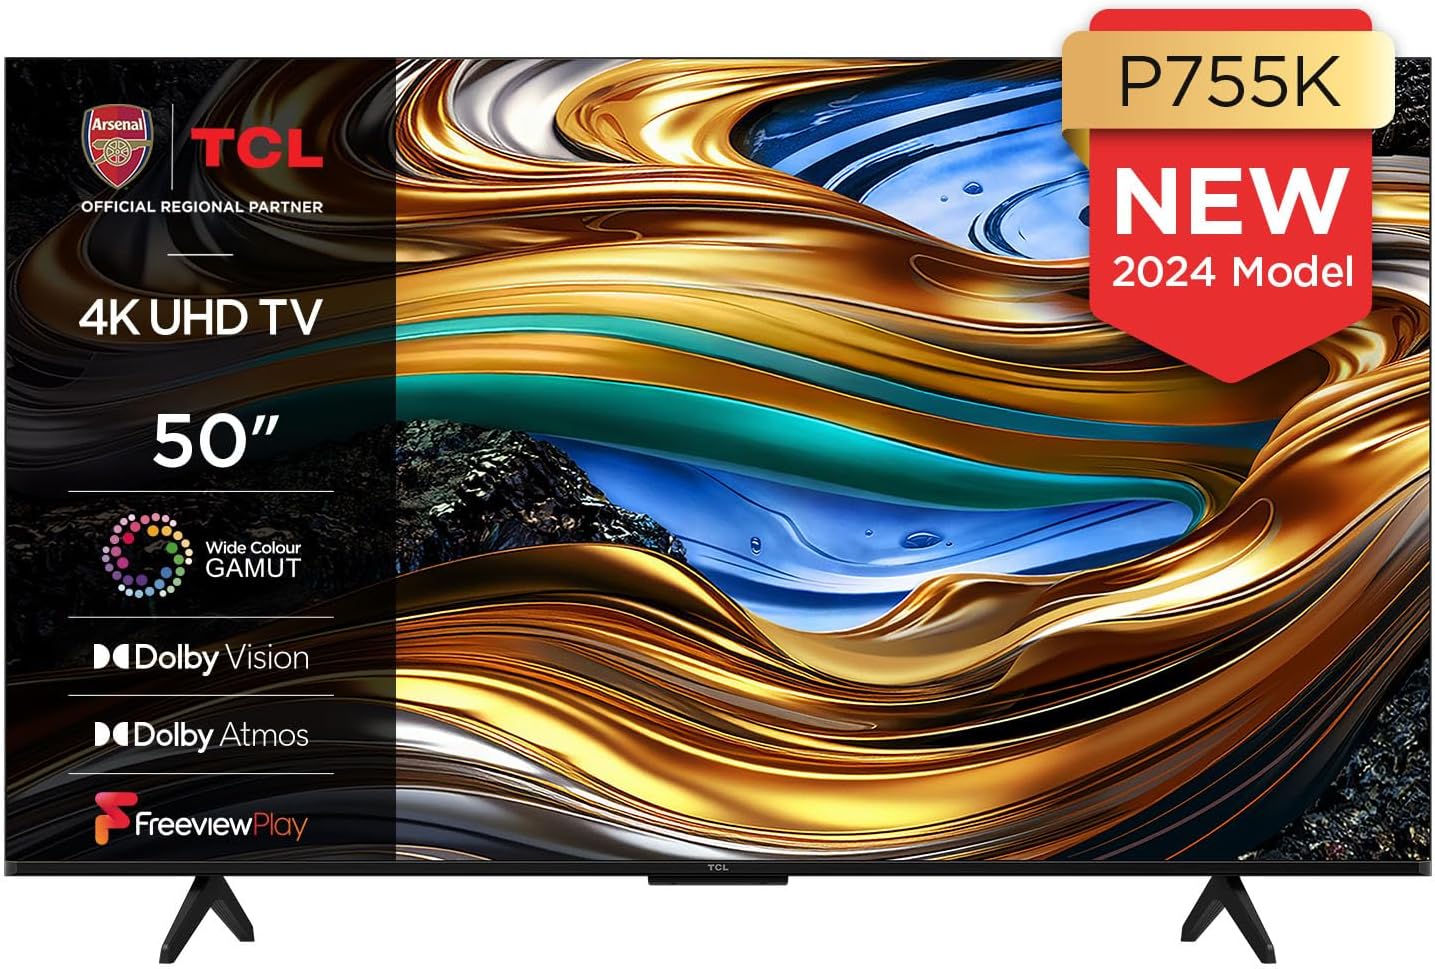 TCL 55P639K 55 - inch 4K Smart TV, HDR, Ultra HD, Powered by Android TV, Bezeless design (Freeview Play, Game Master, Dolby Audio, HDR 10 compatible with Google assistant & Alexa) - Amazing Gadgets Outlet